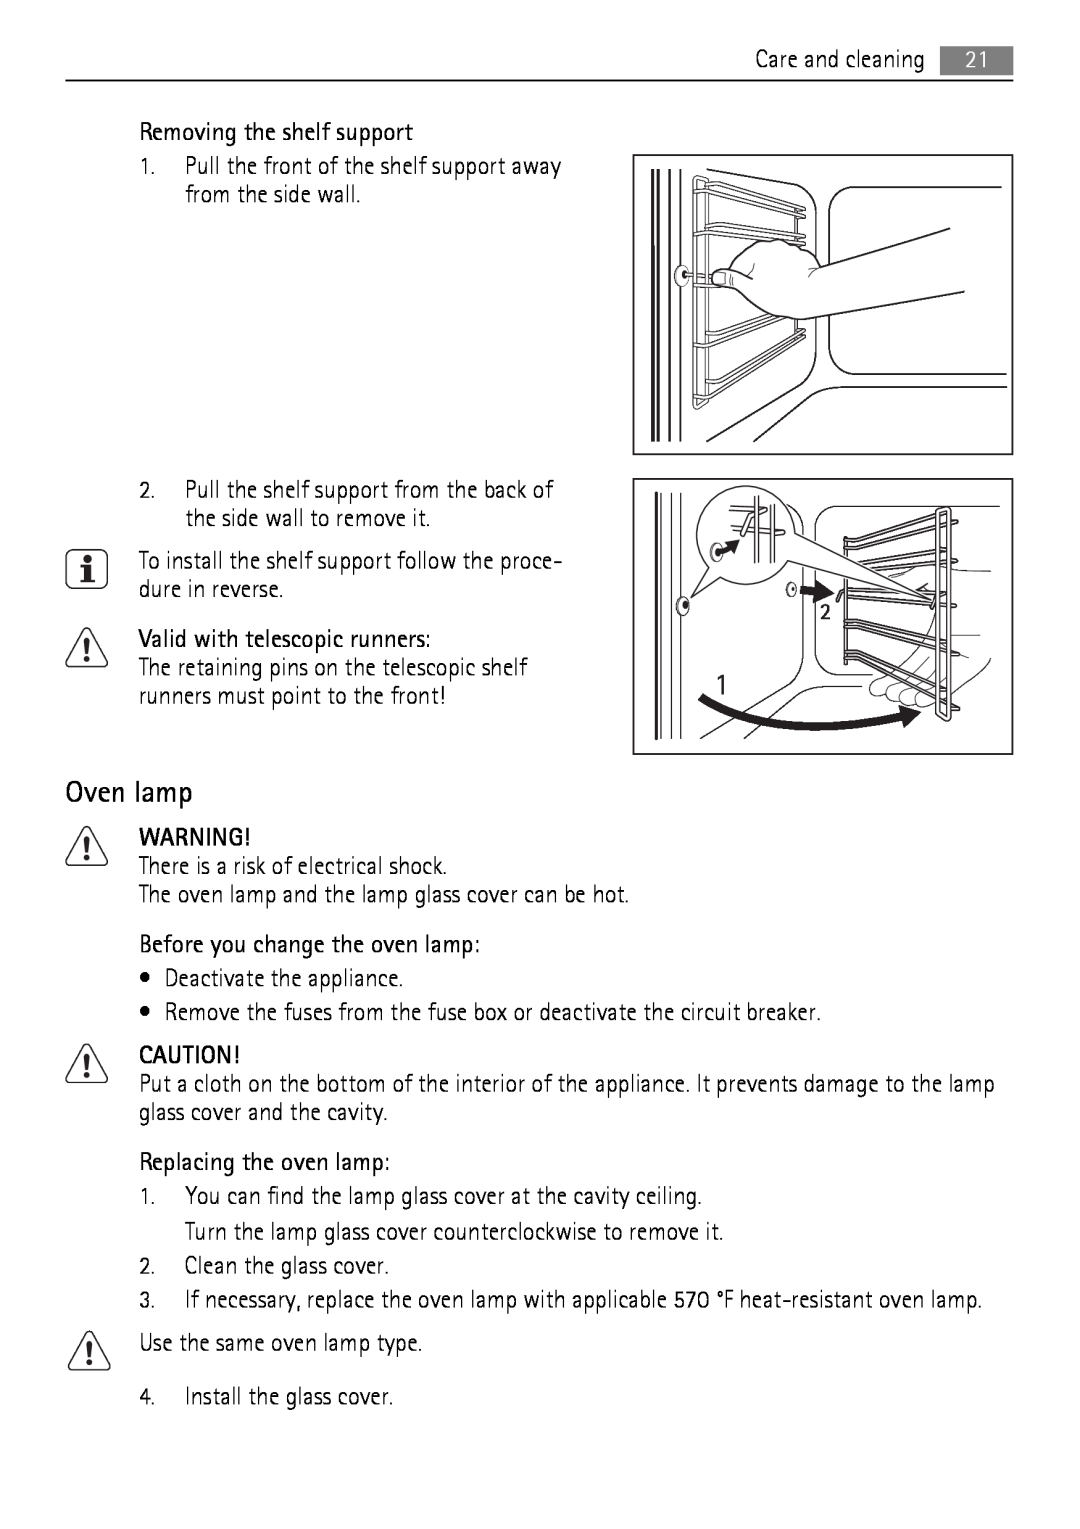 AEG BC300001M 24 user manual Oven lamp, Removing the shelf support 